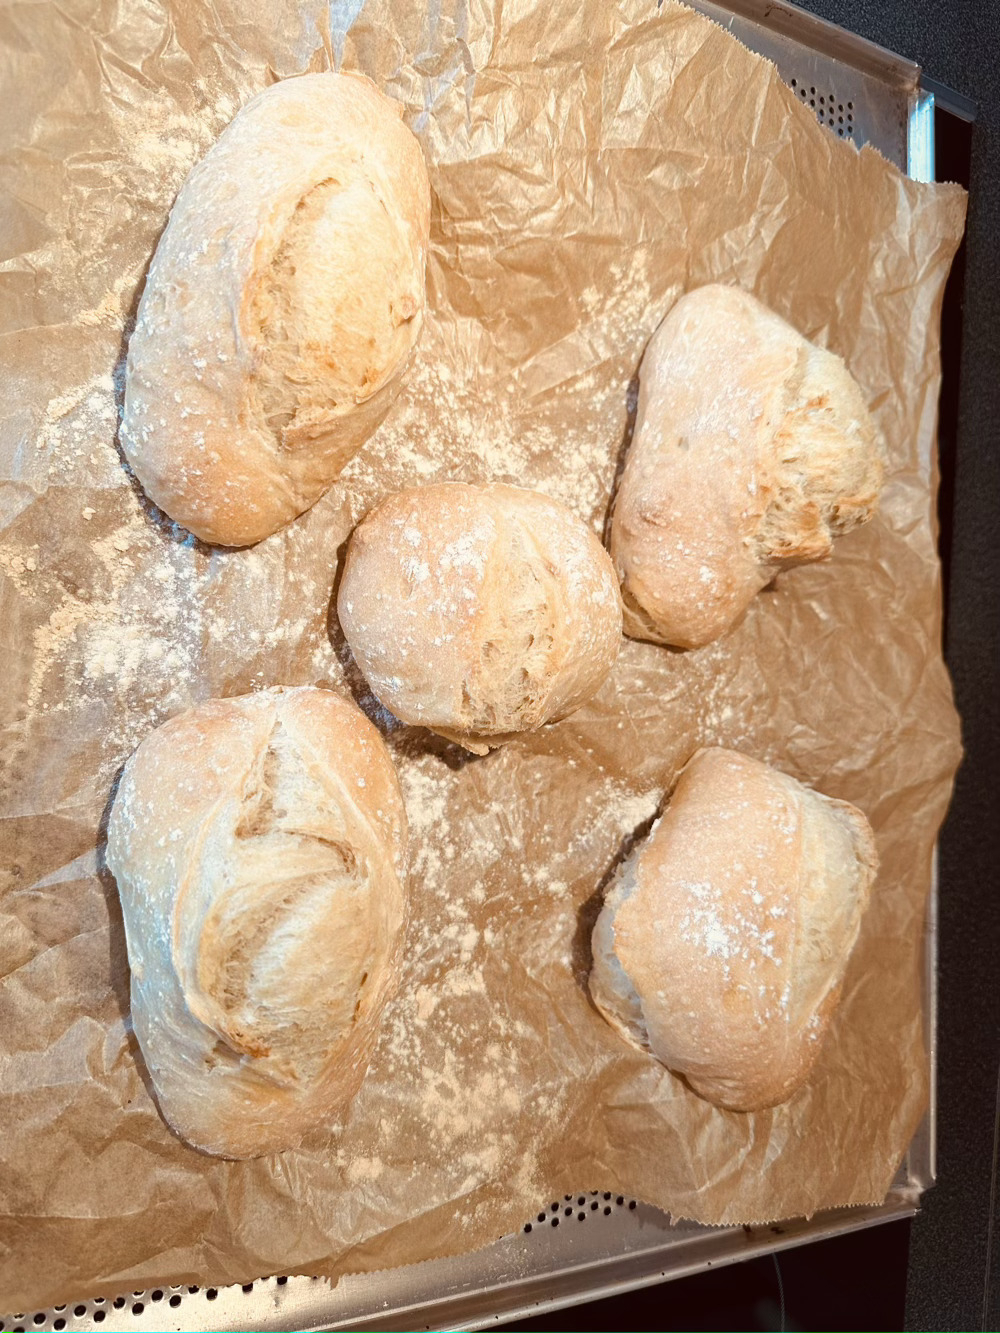 5 bread rolls fresh from the oven, fairly blond